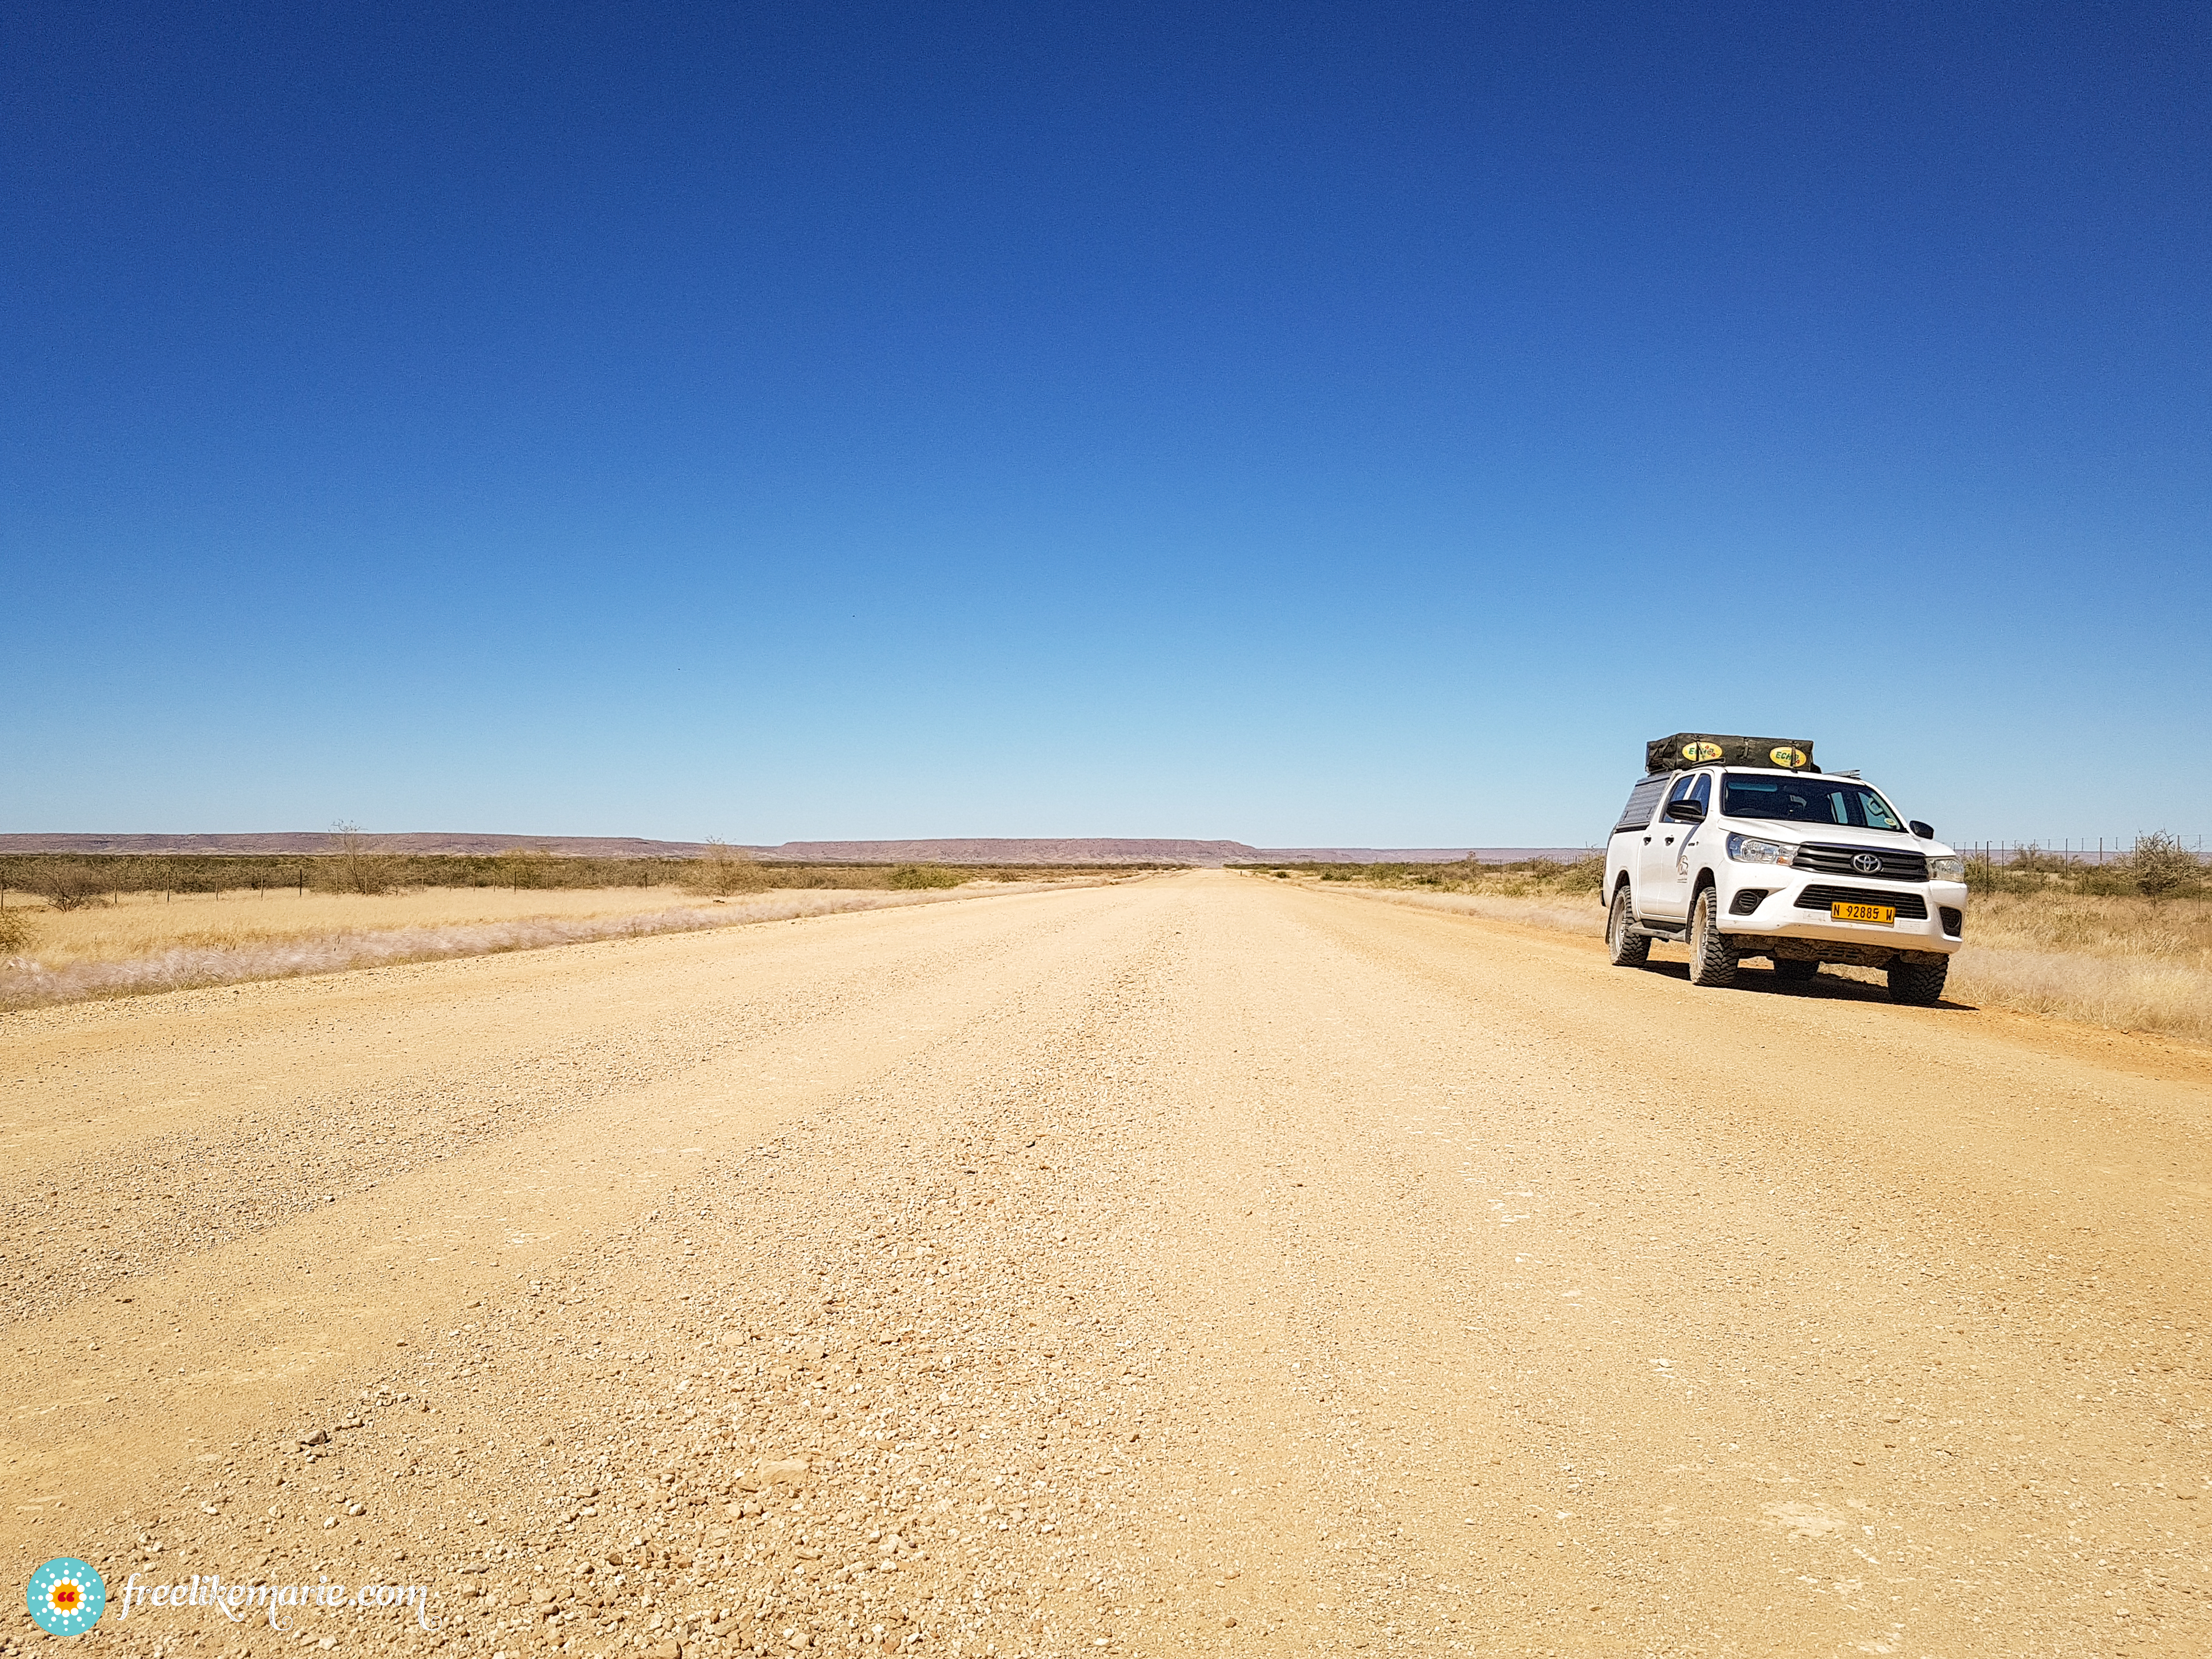 The Wide Roads of Namibia